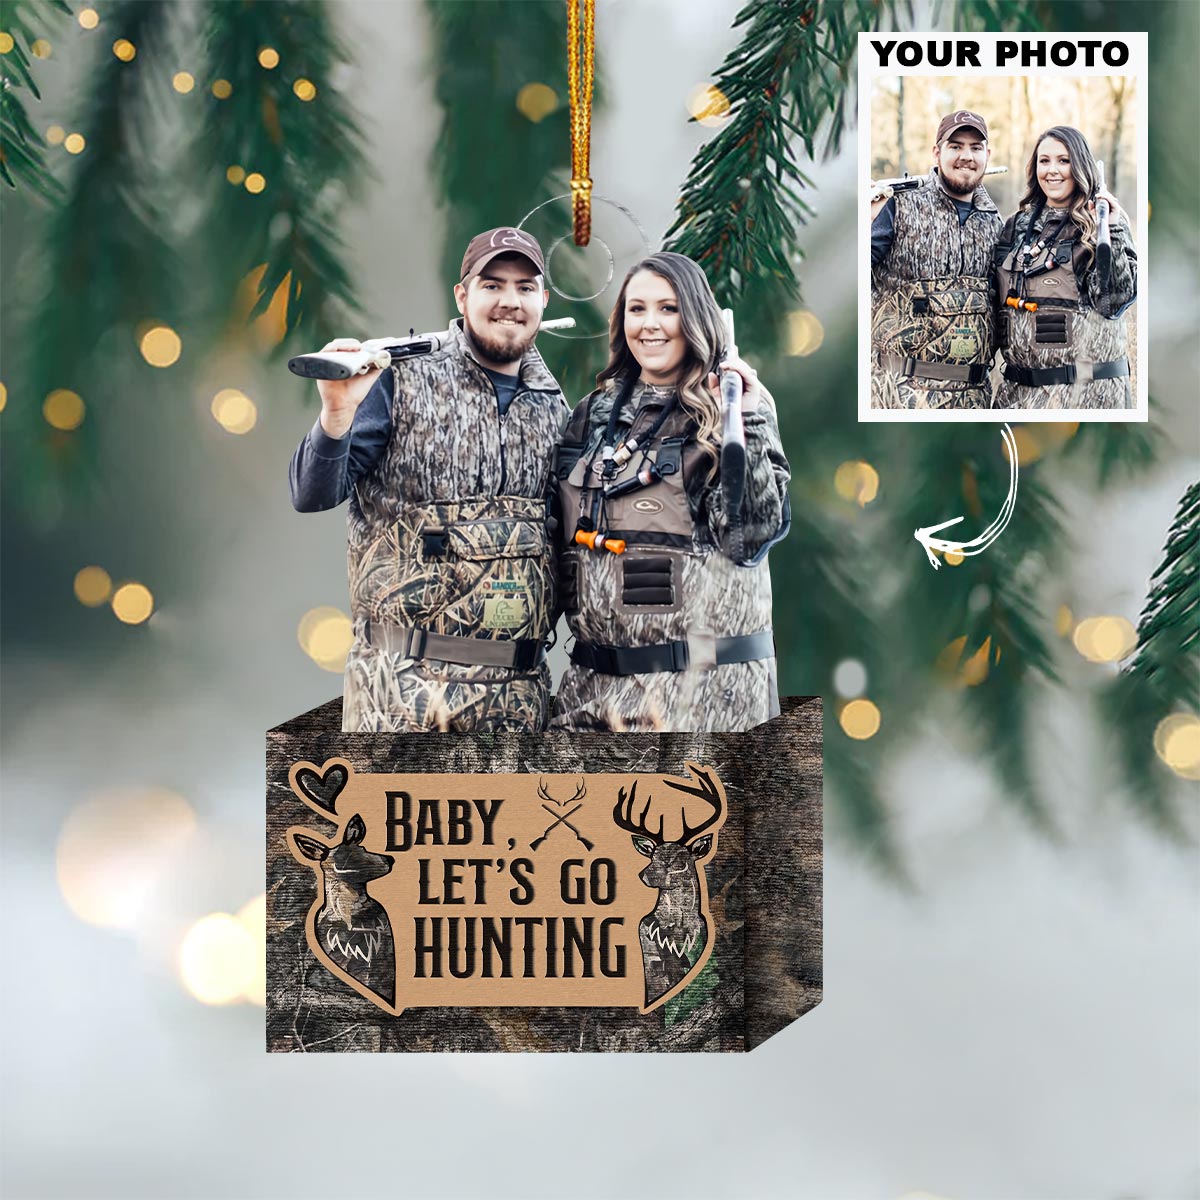 Baby, Let's Go Hunting - Personalized Photo Mica Ornament - Christmas Gift For Hunting Couple, Hunting Lovers, Wife, Husband UPL0HD035